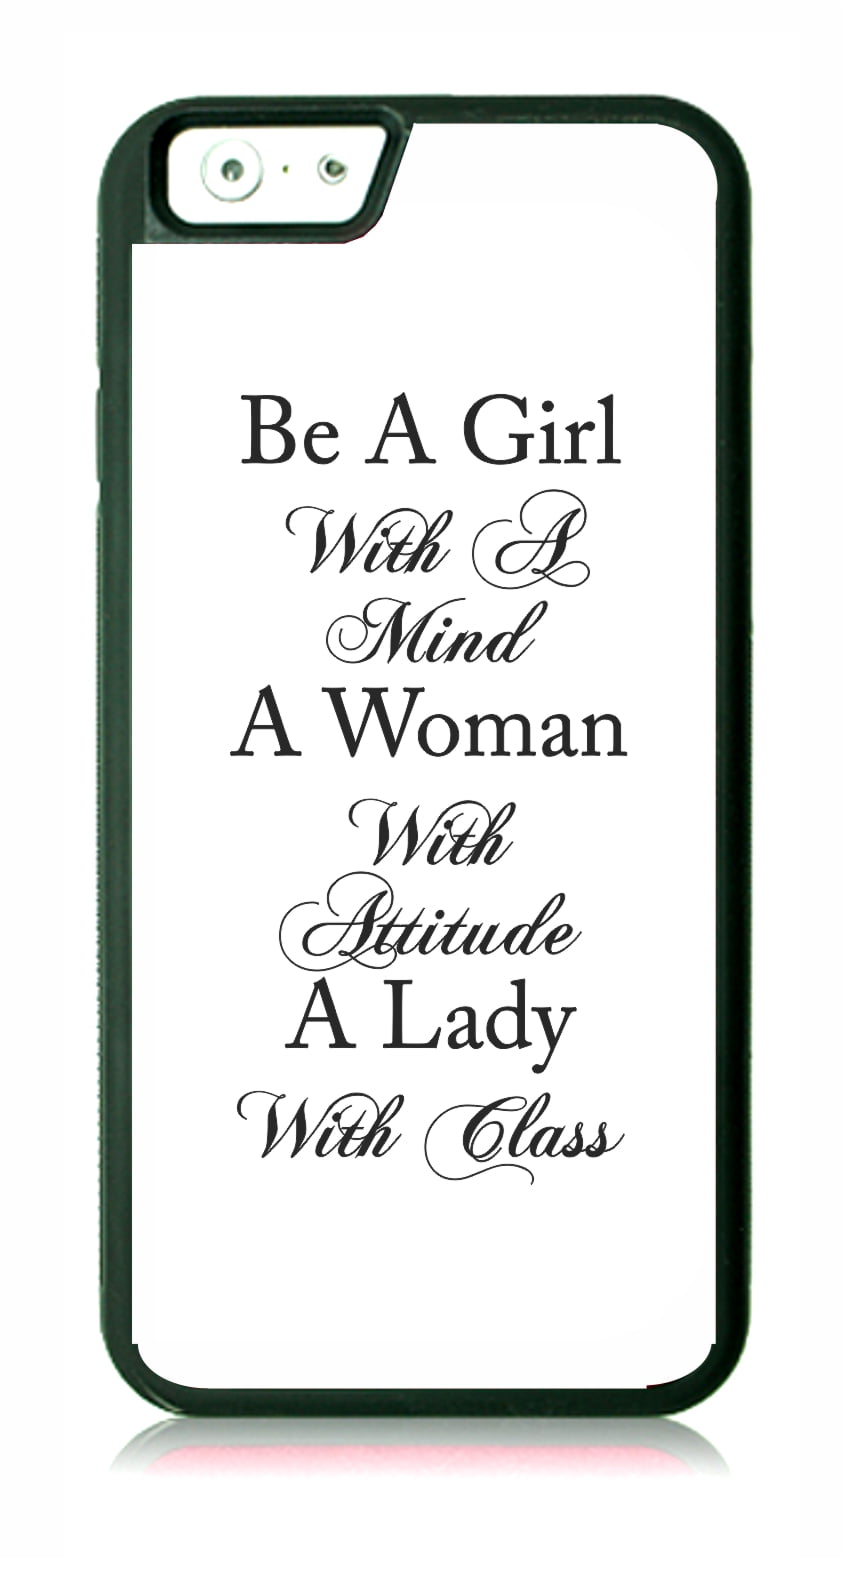 Mind Attitude Class Quote Black Rubber Case For The Apple Iphone 6 Iphone 6s Iphone 6 Accessories Iphone 6s Accessories Walmart Com Walmart Com